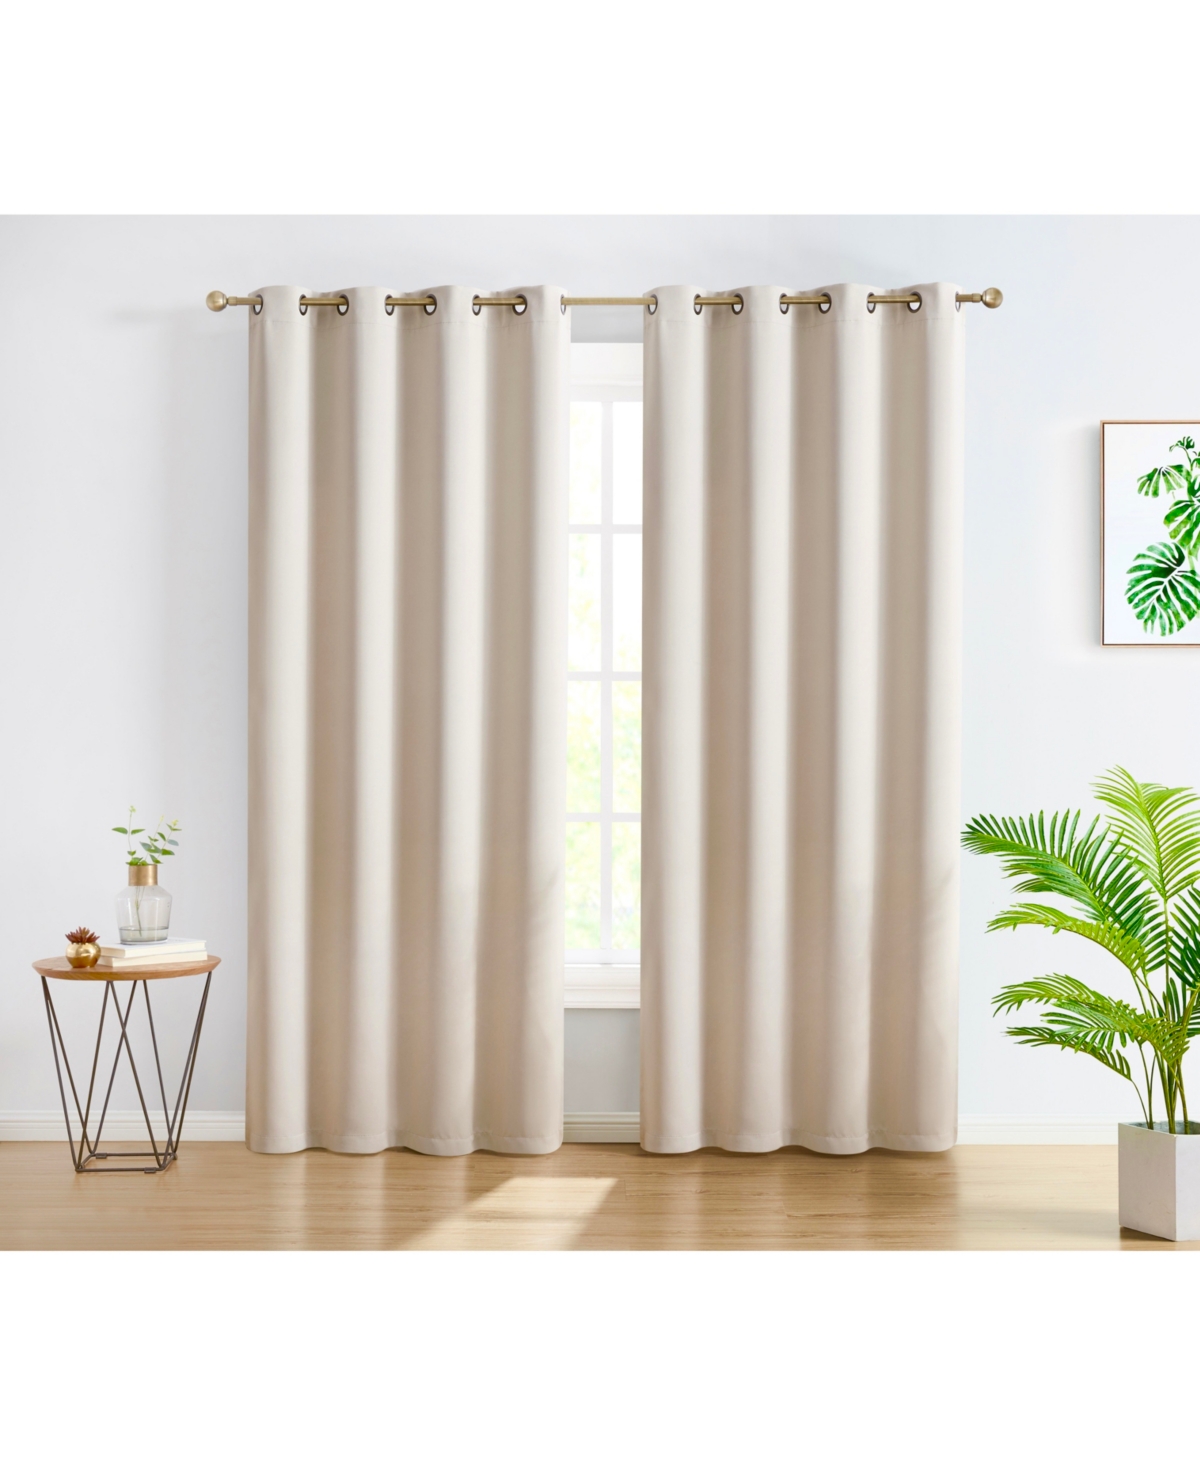 Oxford Blackout Curtains for Bedroom, Noise Reduction Thermal Insulated Window Curtain Grommet Panels, Set of 2 - Beige